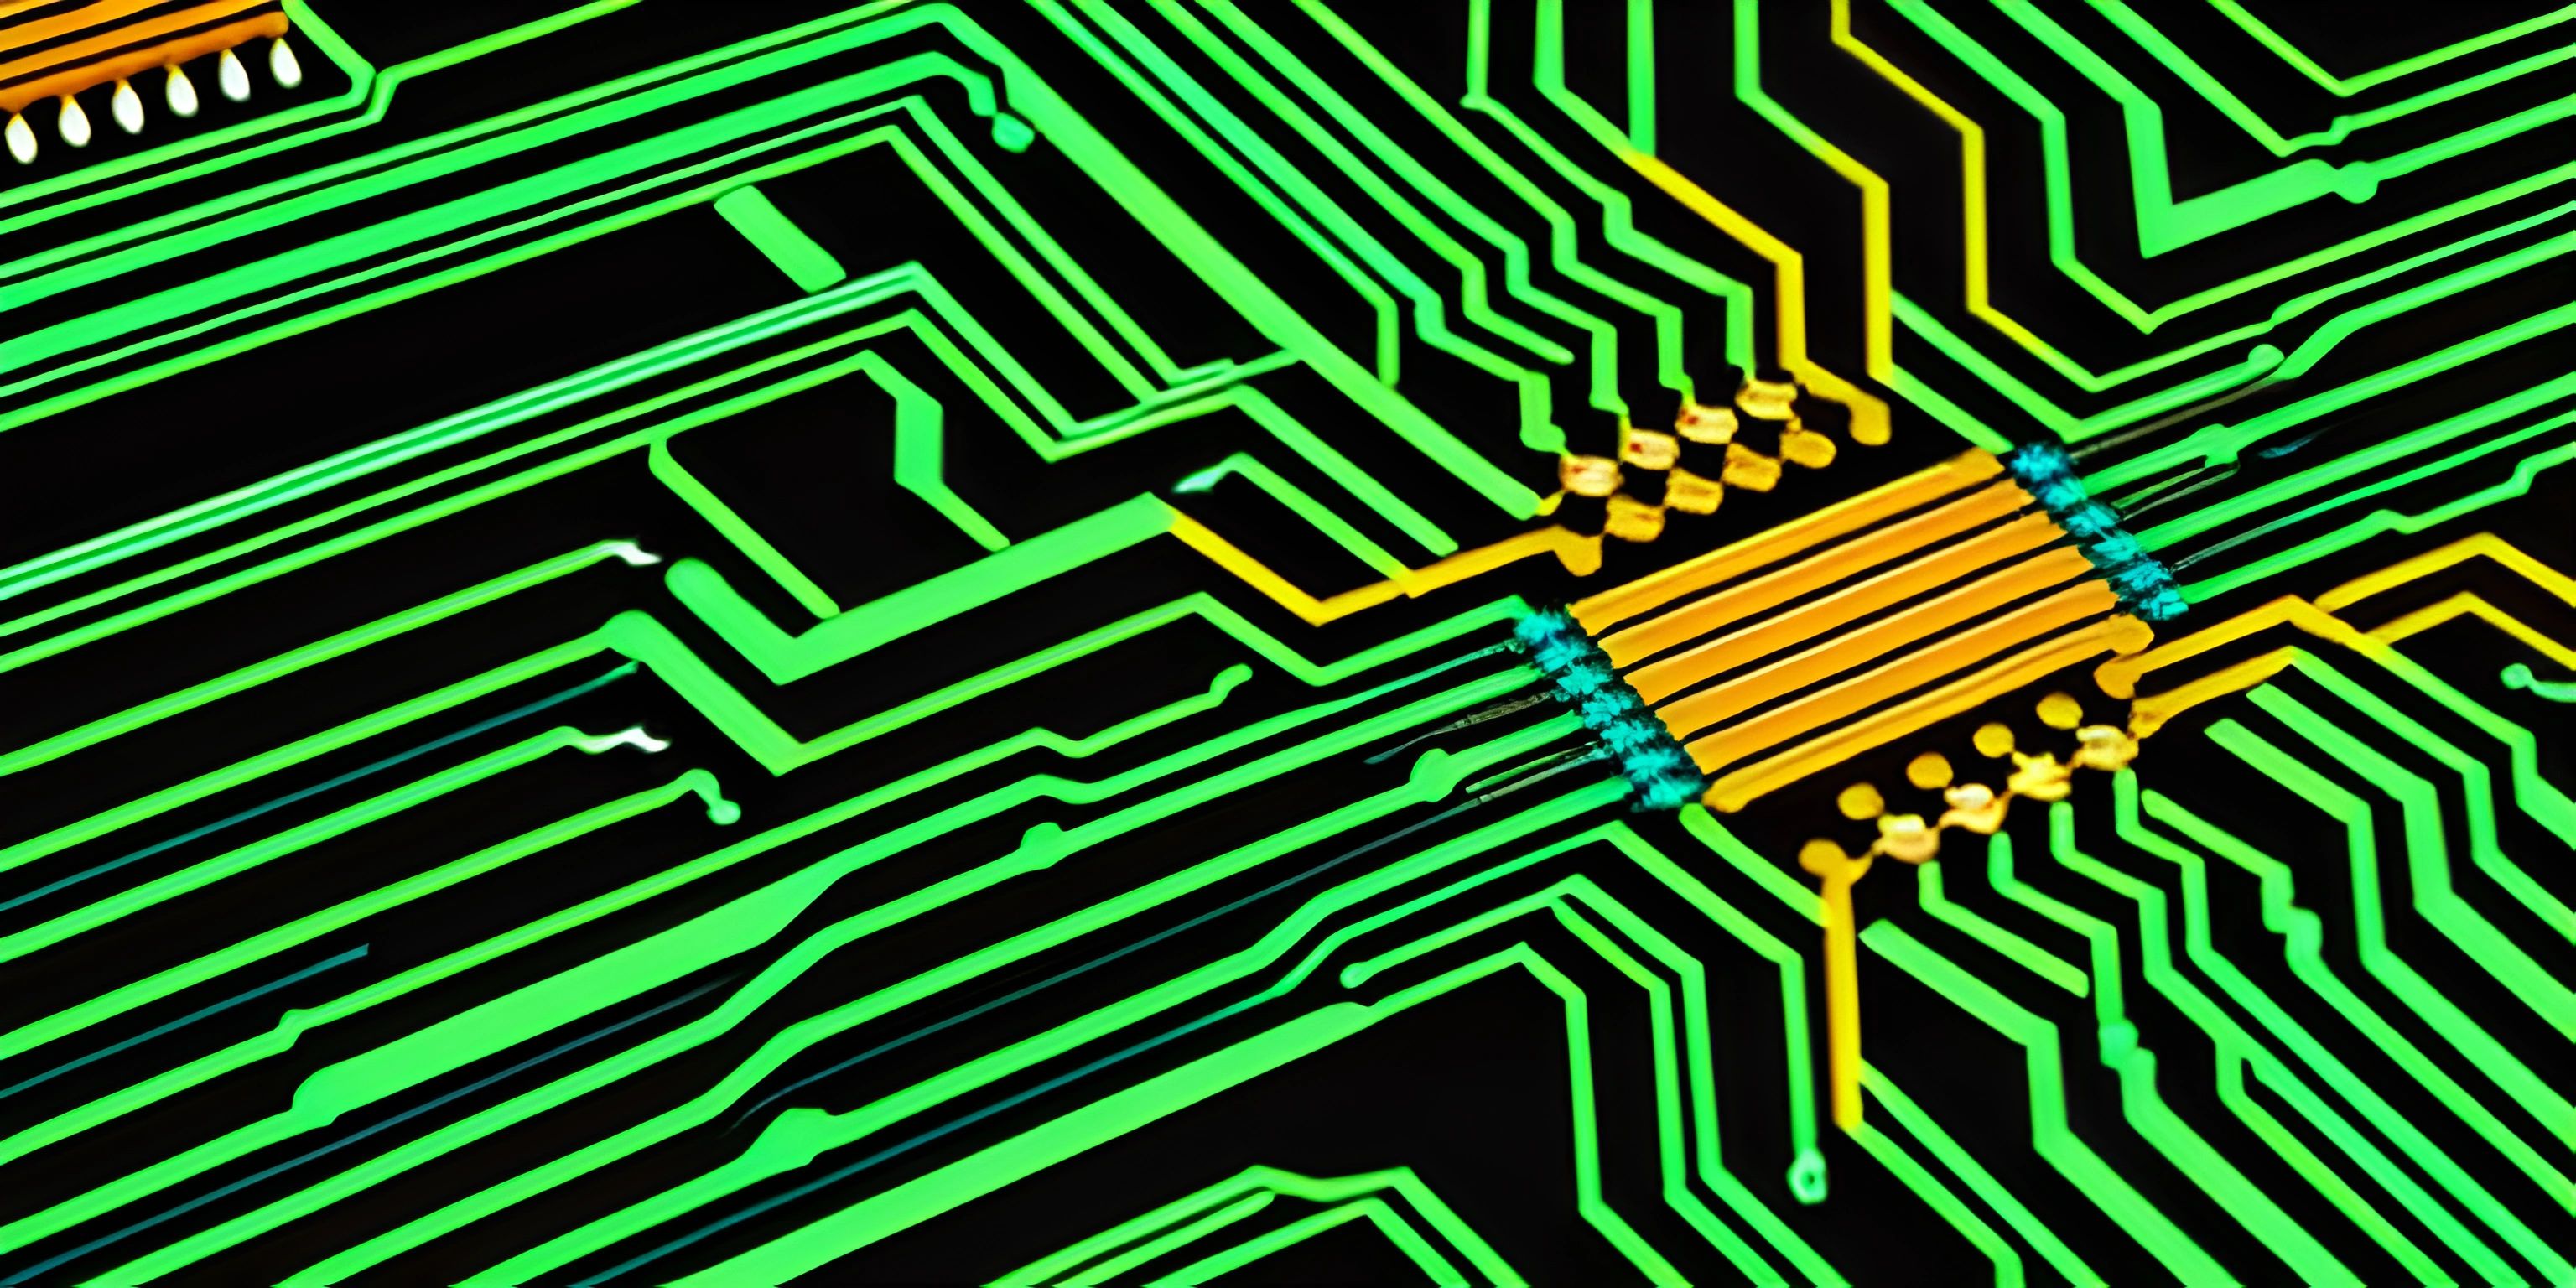 an electronic circuit board showing the green and yellow arrows on it as a background or pattern